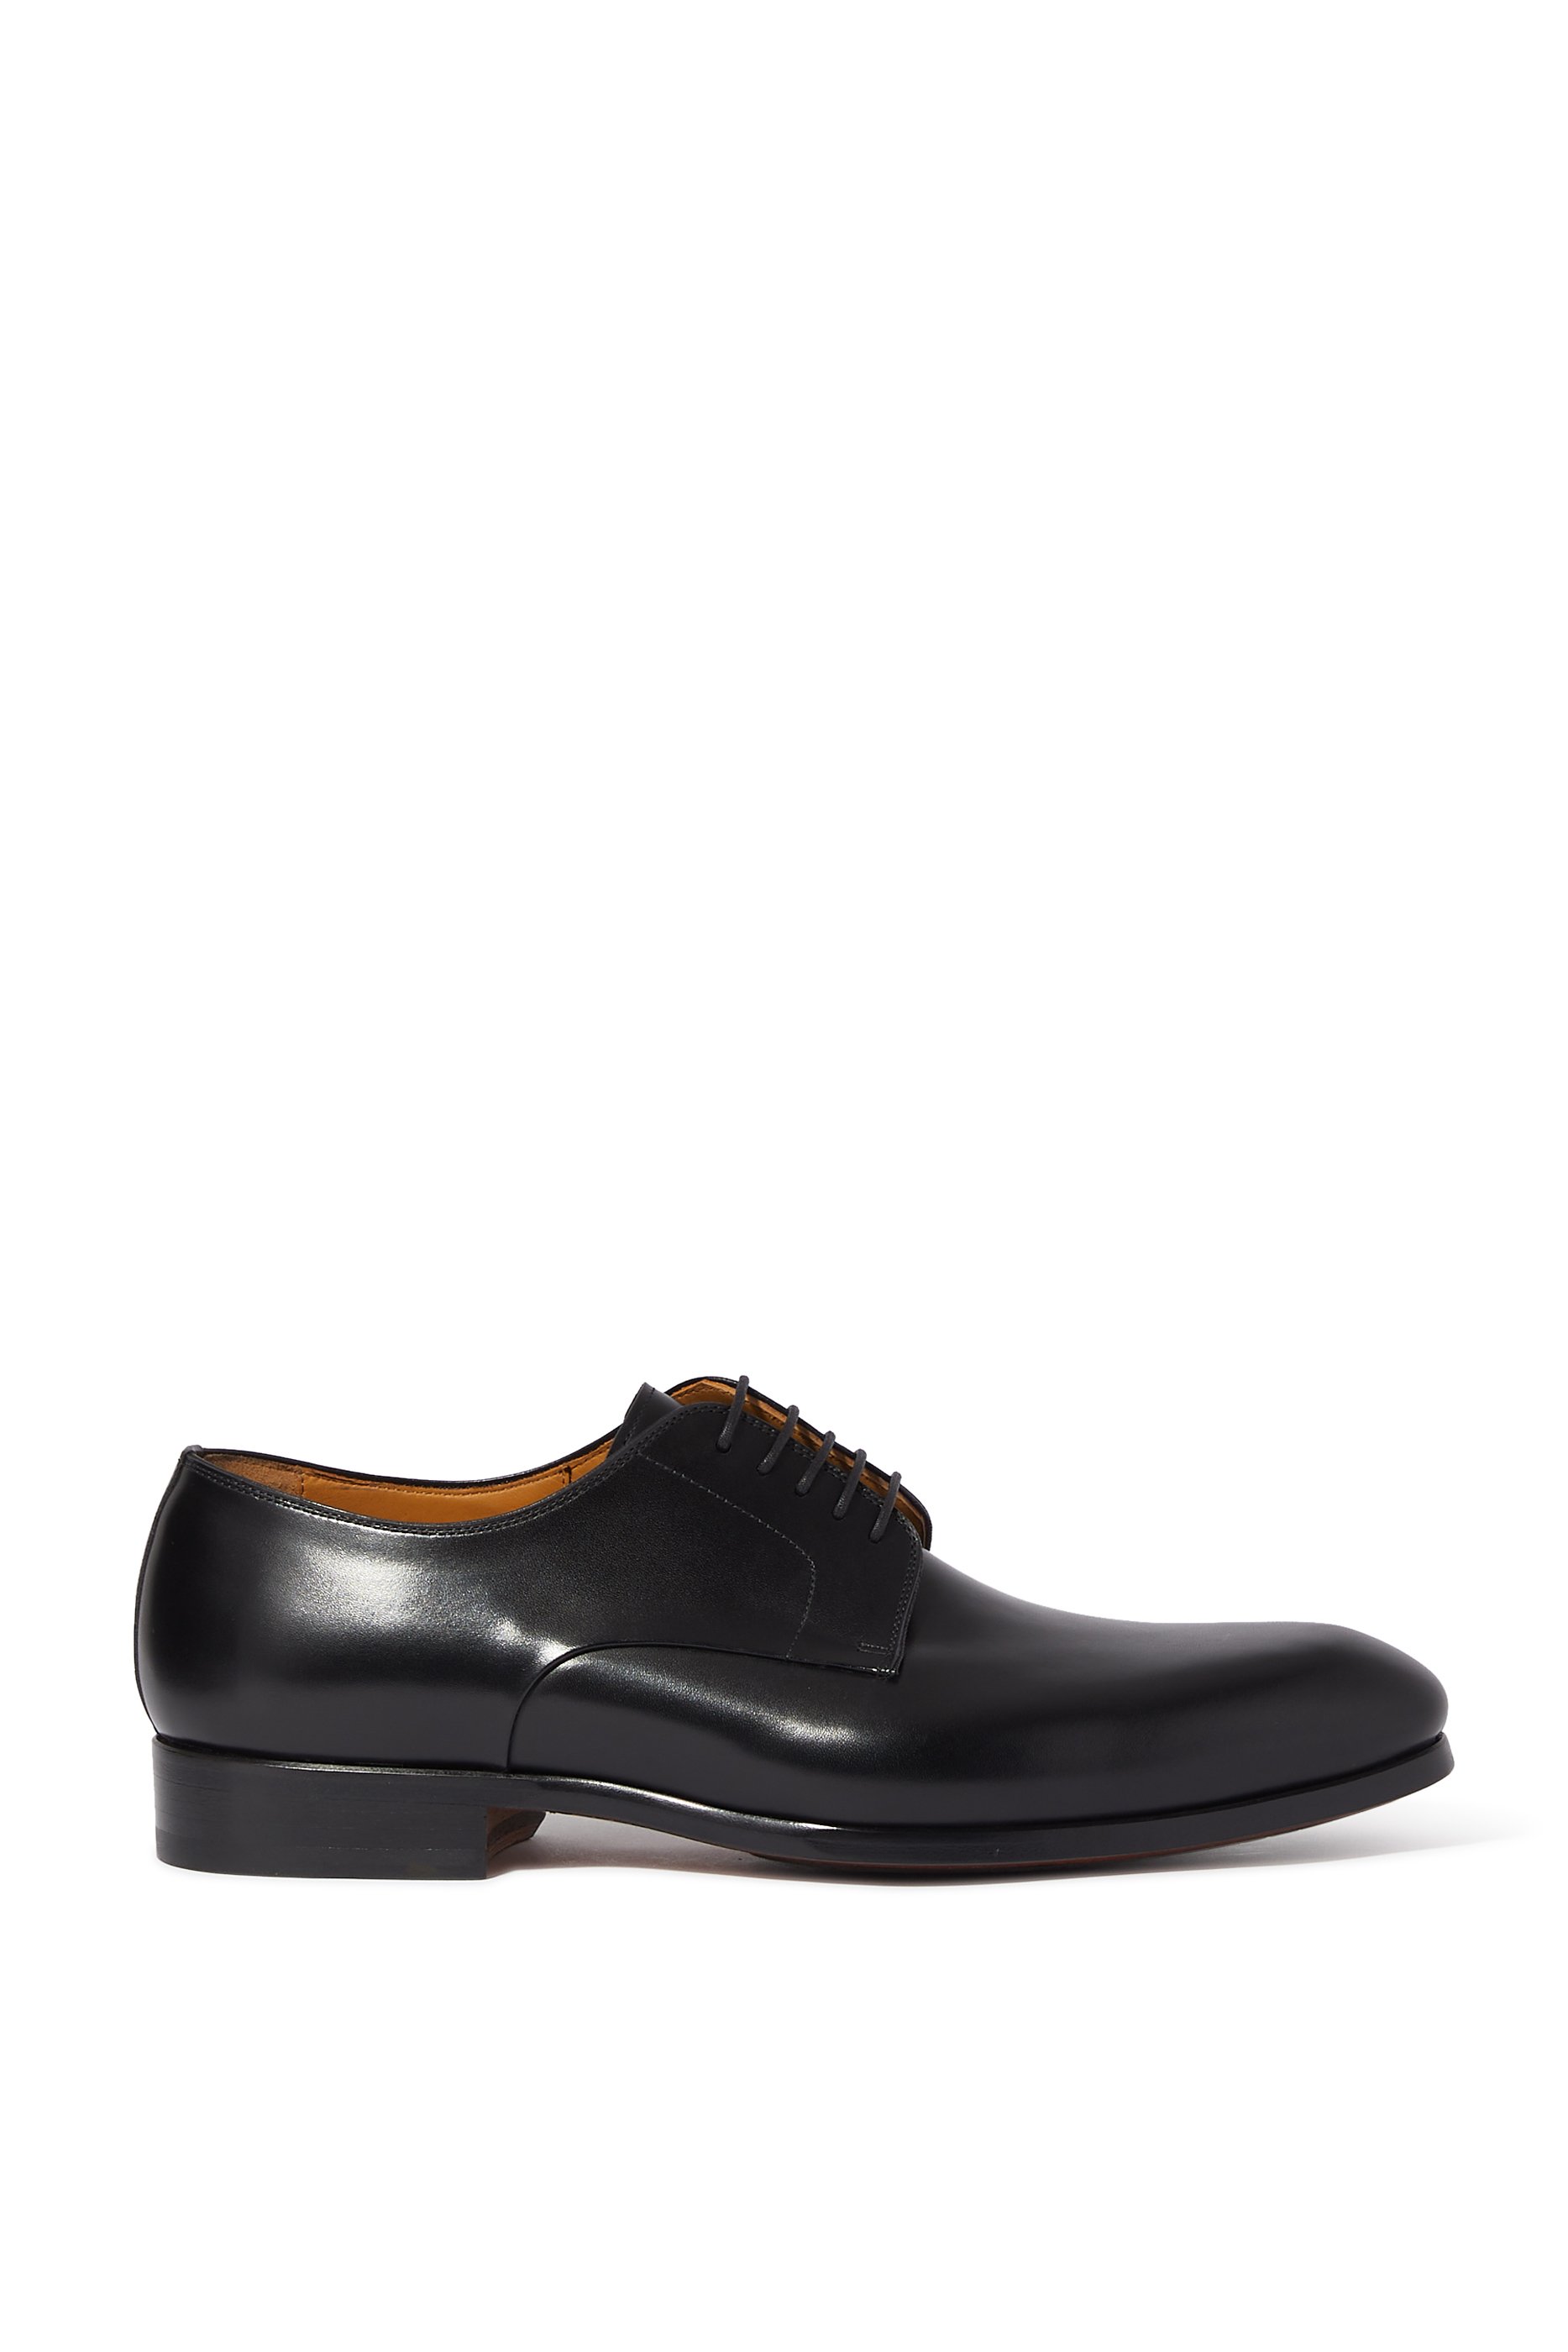 Buy Magnanni Derby Leather Shoes for Mens | Bloomingdale's UAE